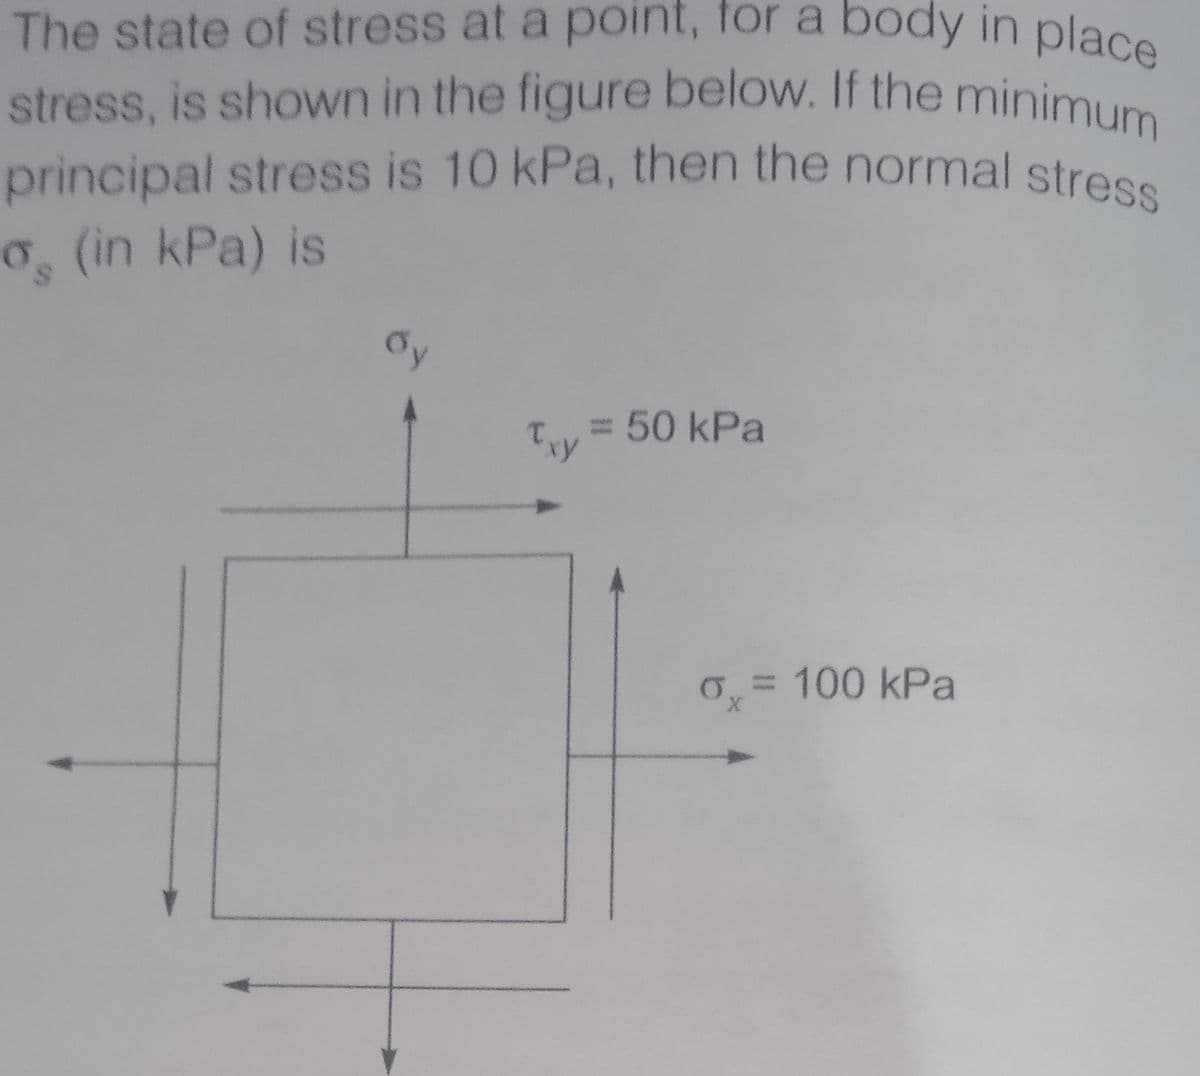 principal stress is 10 kPa, then the normal stress
stress, is shown in the figure below. If the minimum
The state of stress at a point, for a body in place
o (in kPa) is
= 50 kPa
0,= 100 kPa
%3D
X,
